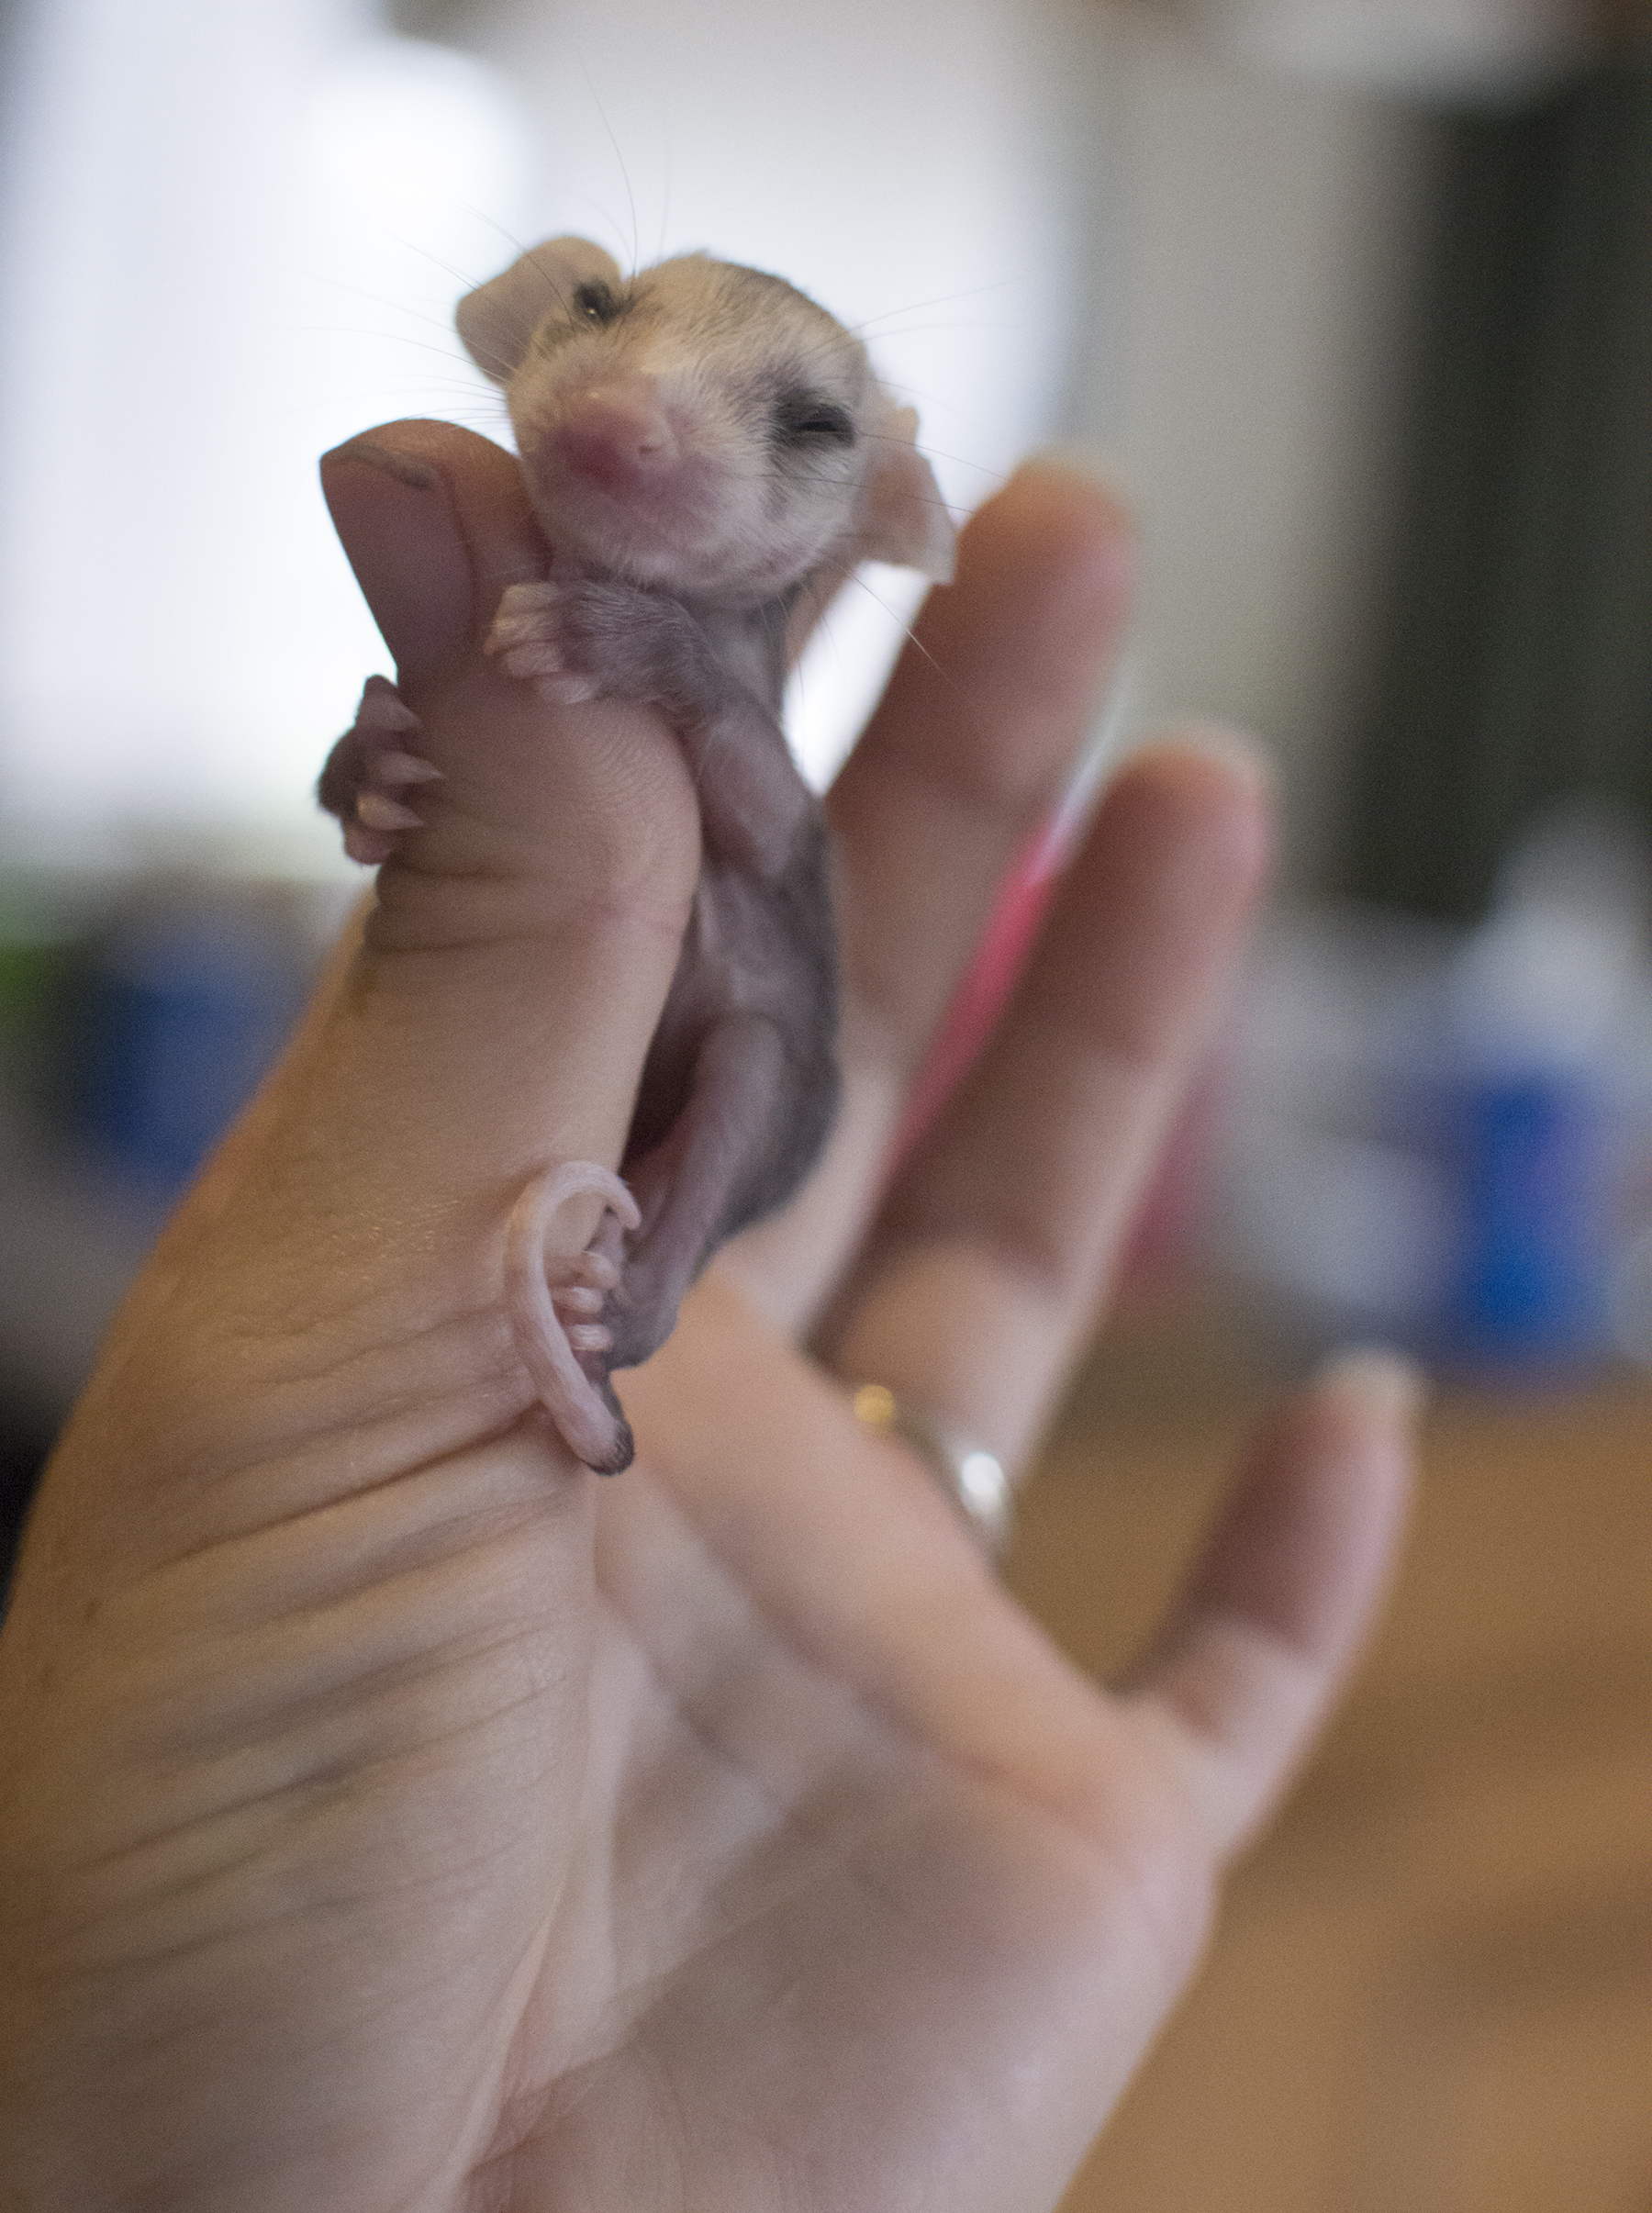 baby opossum wrapped around someone's thumb with its eyes closed